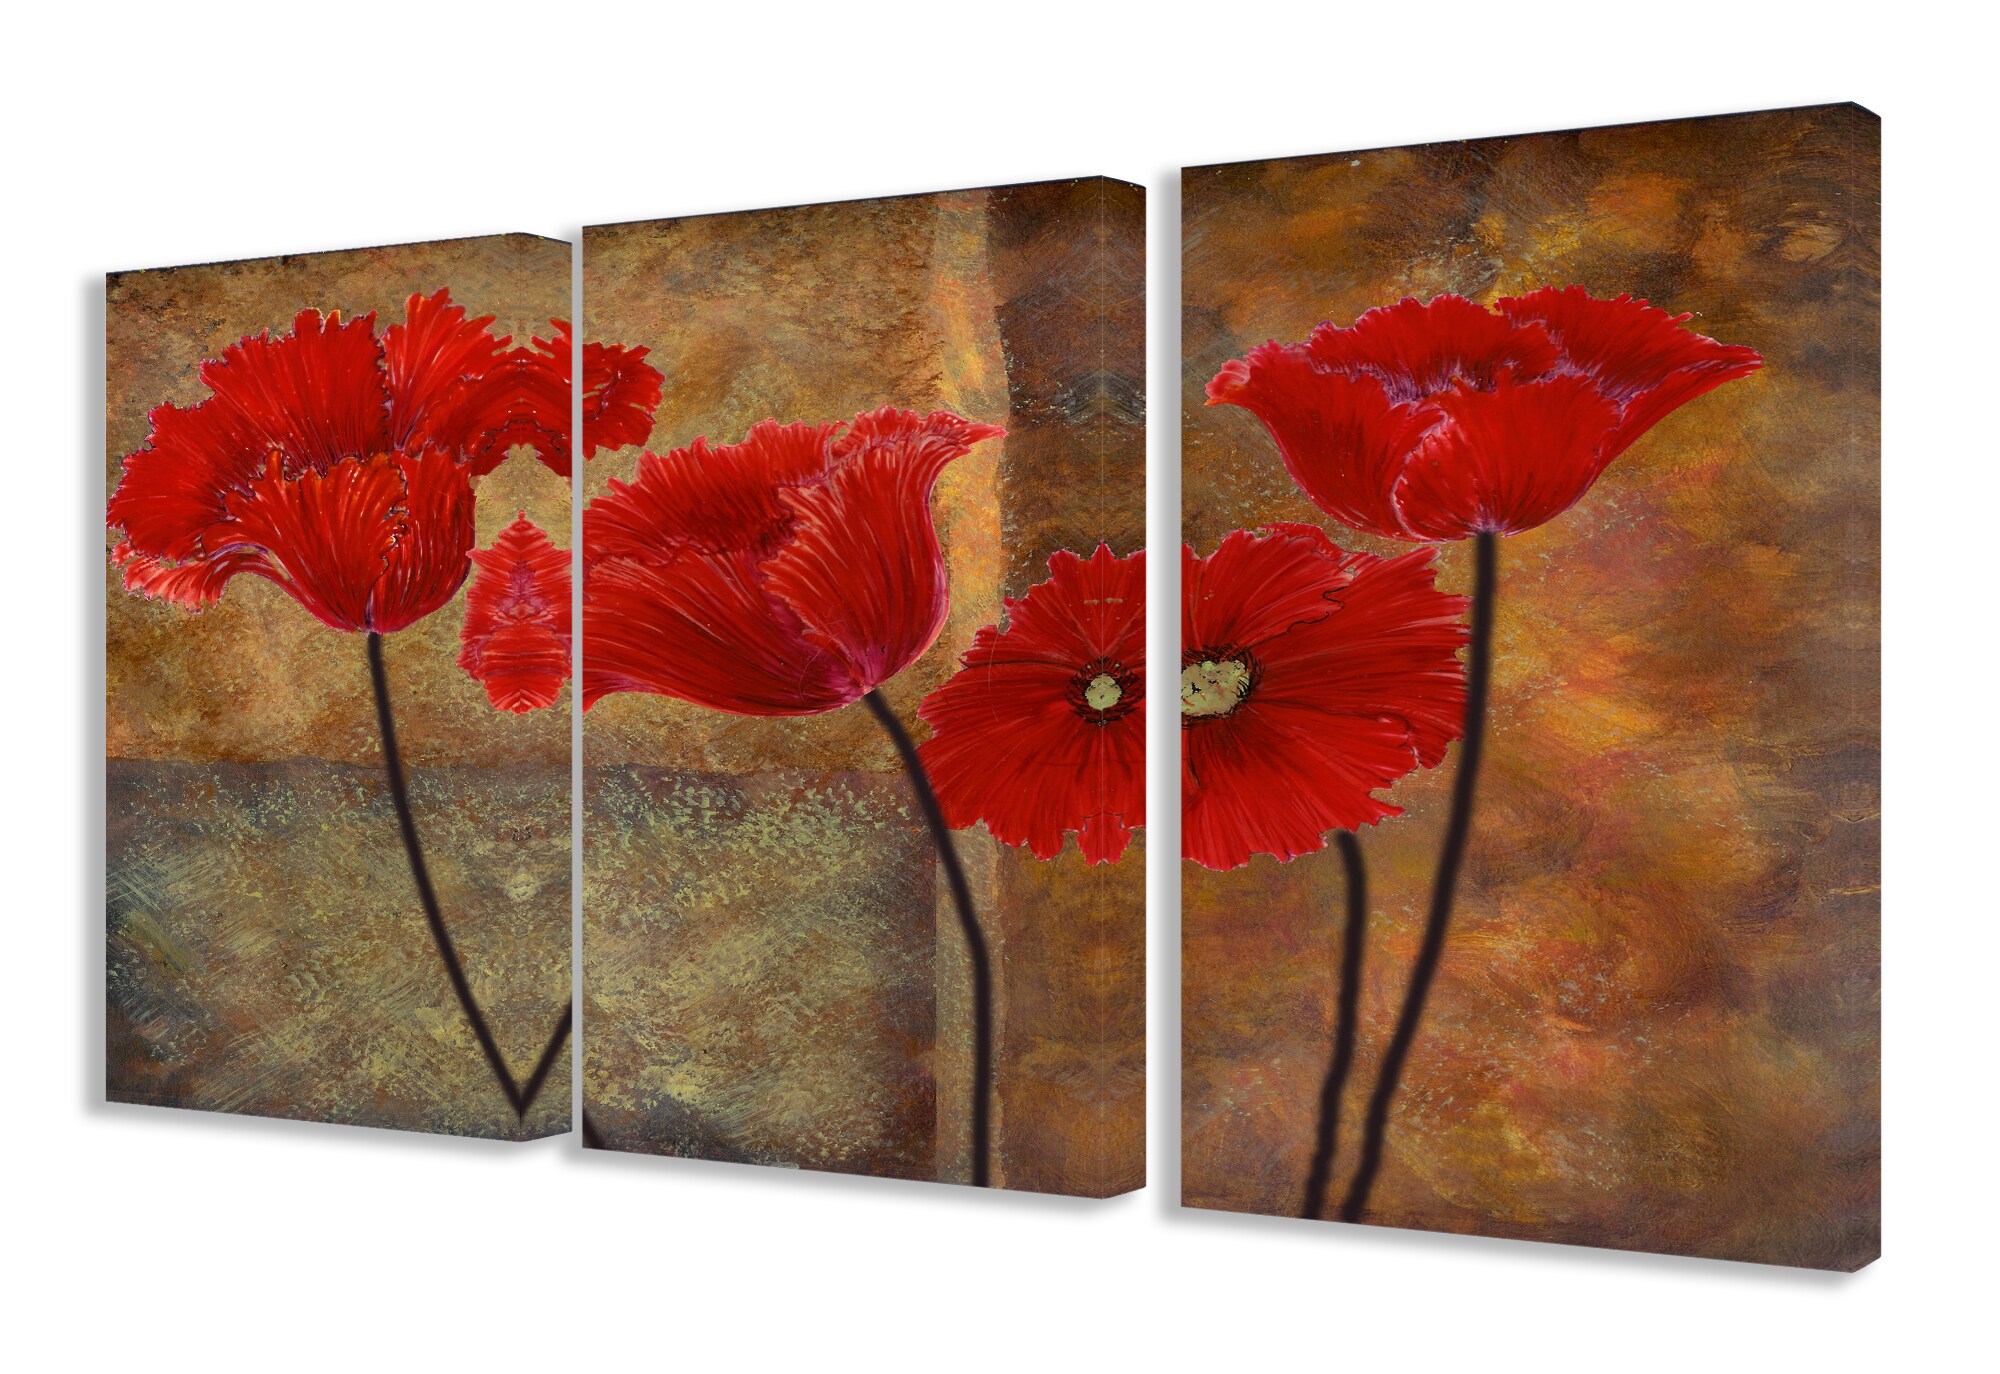 11 x 0.5 x 17 Stupell Home Décor Poppies On Spice 3-Piece Triptych Wall Plaque Set Proudly Made in USA The Stupell Home Decor Collection twp-108 